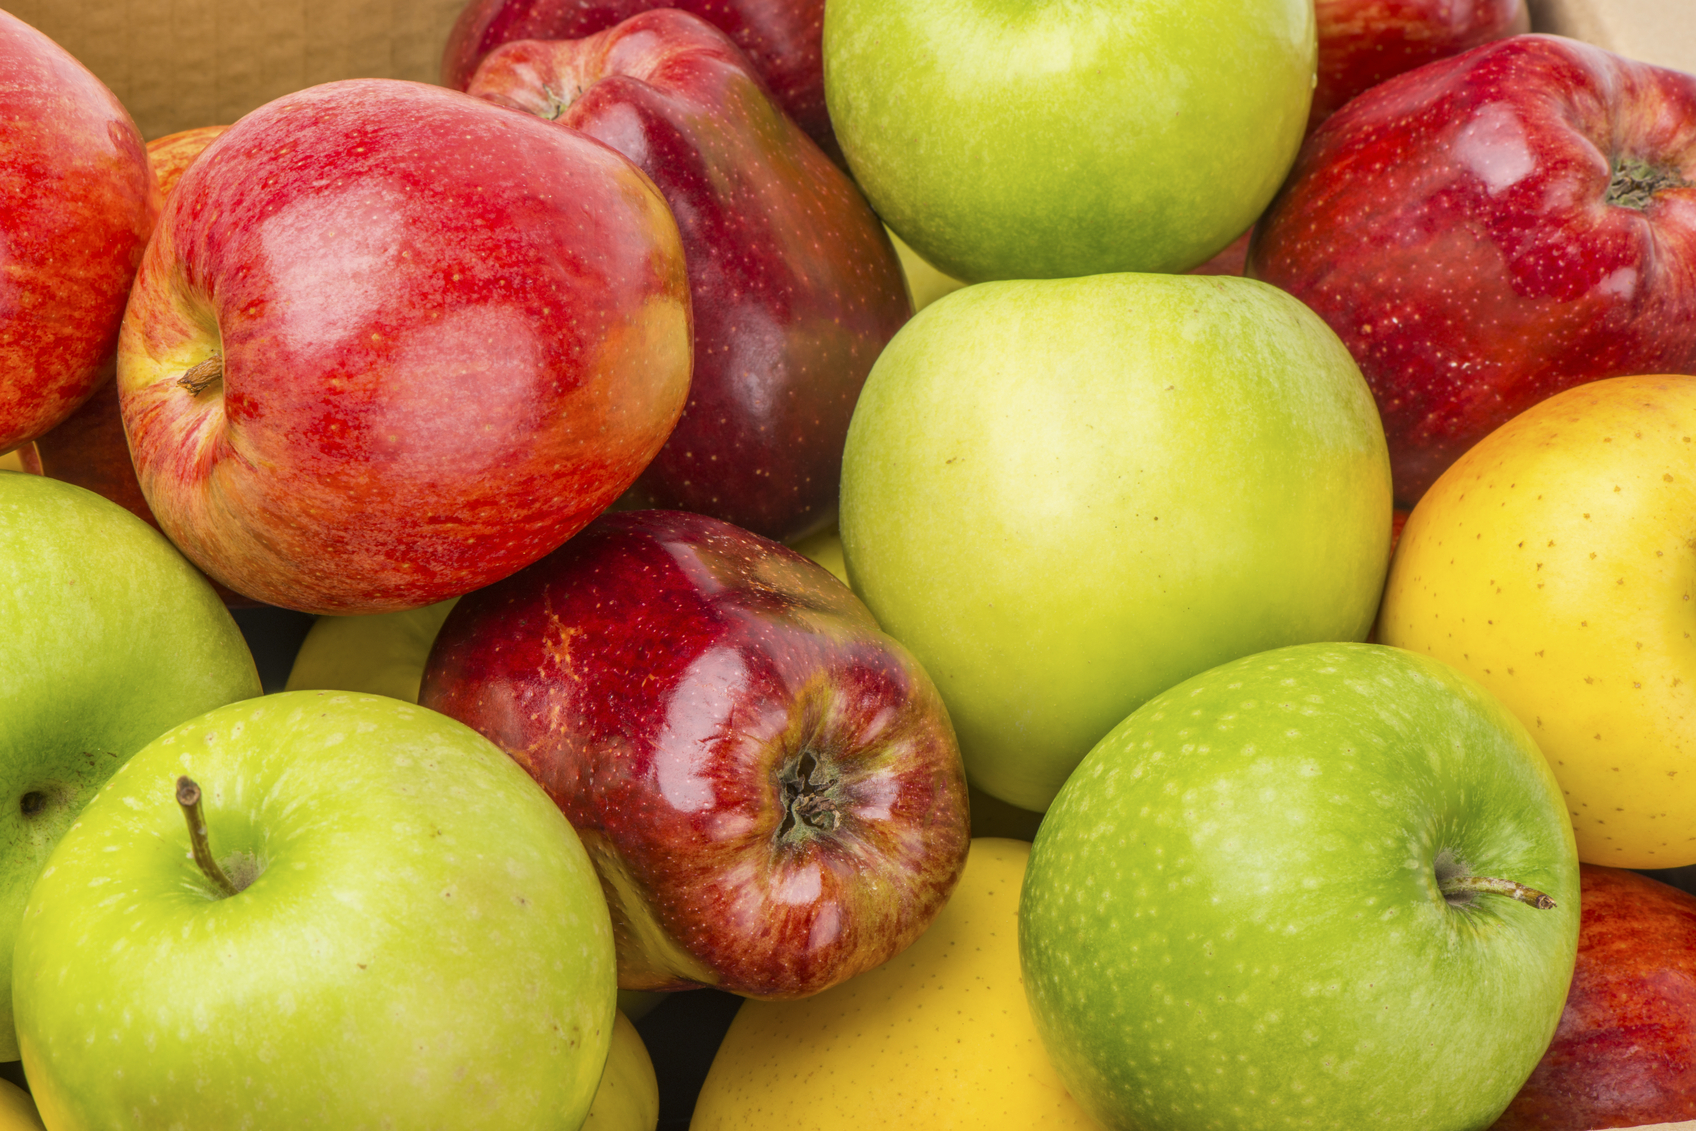 An Apple a Day Keeps the Doctor Away, but are Apples Good for Diabetics?